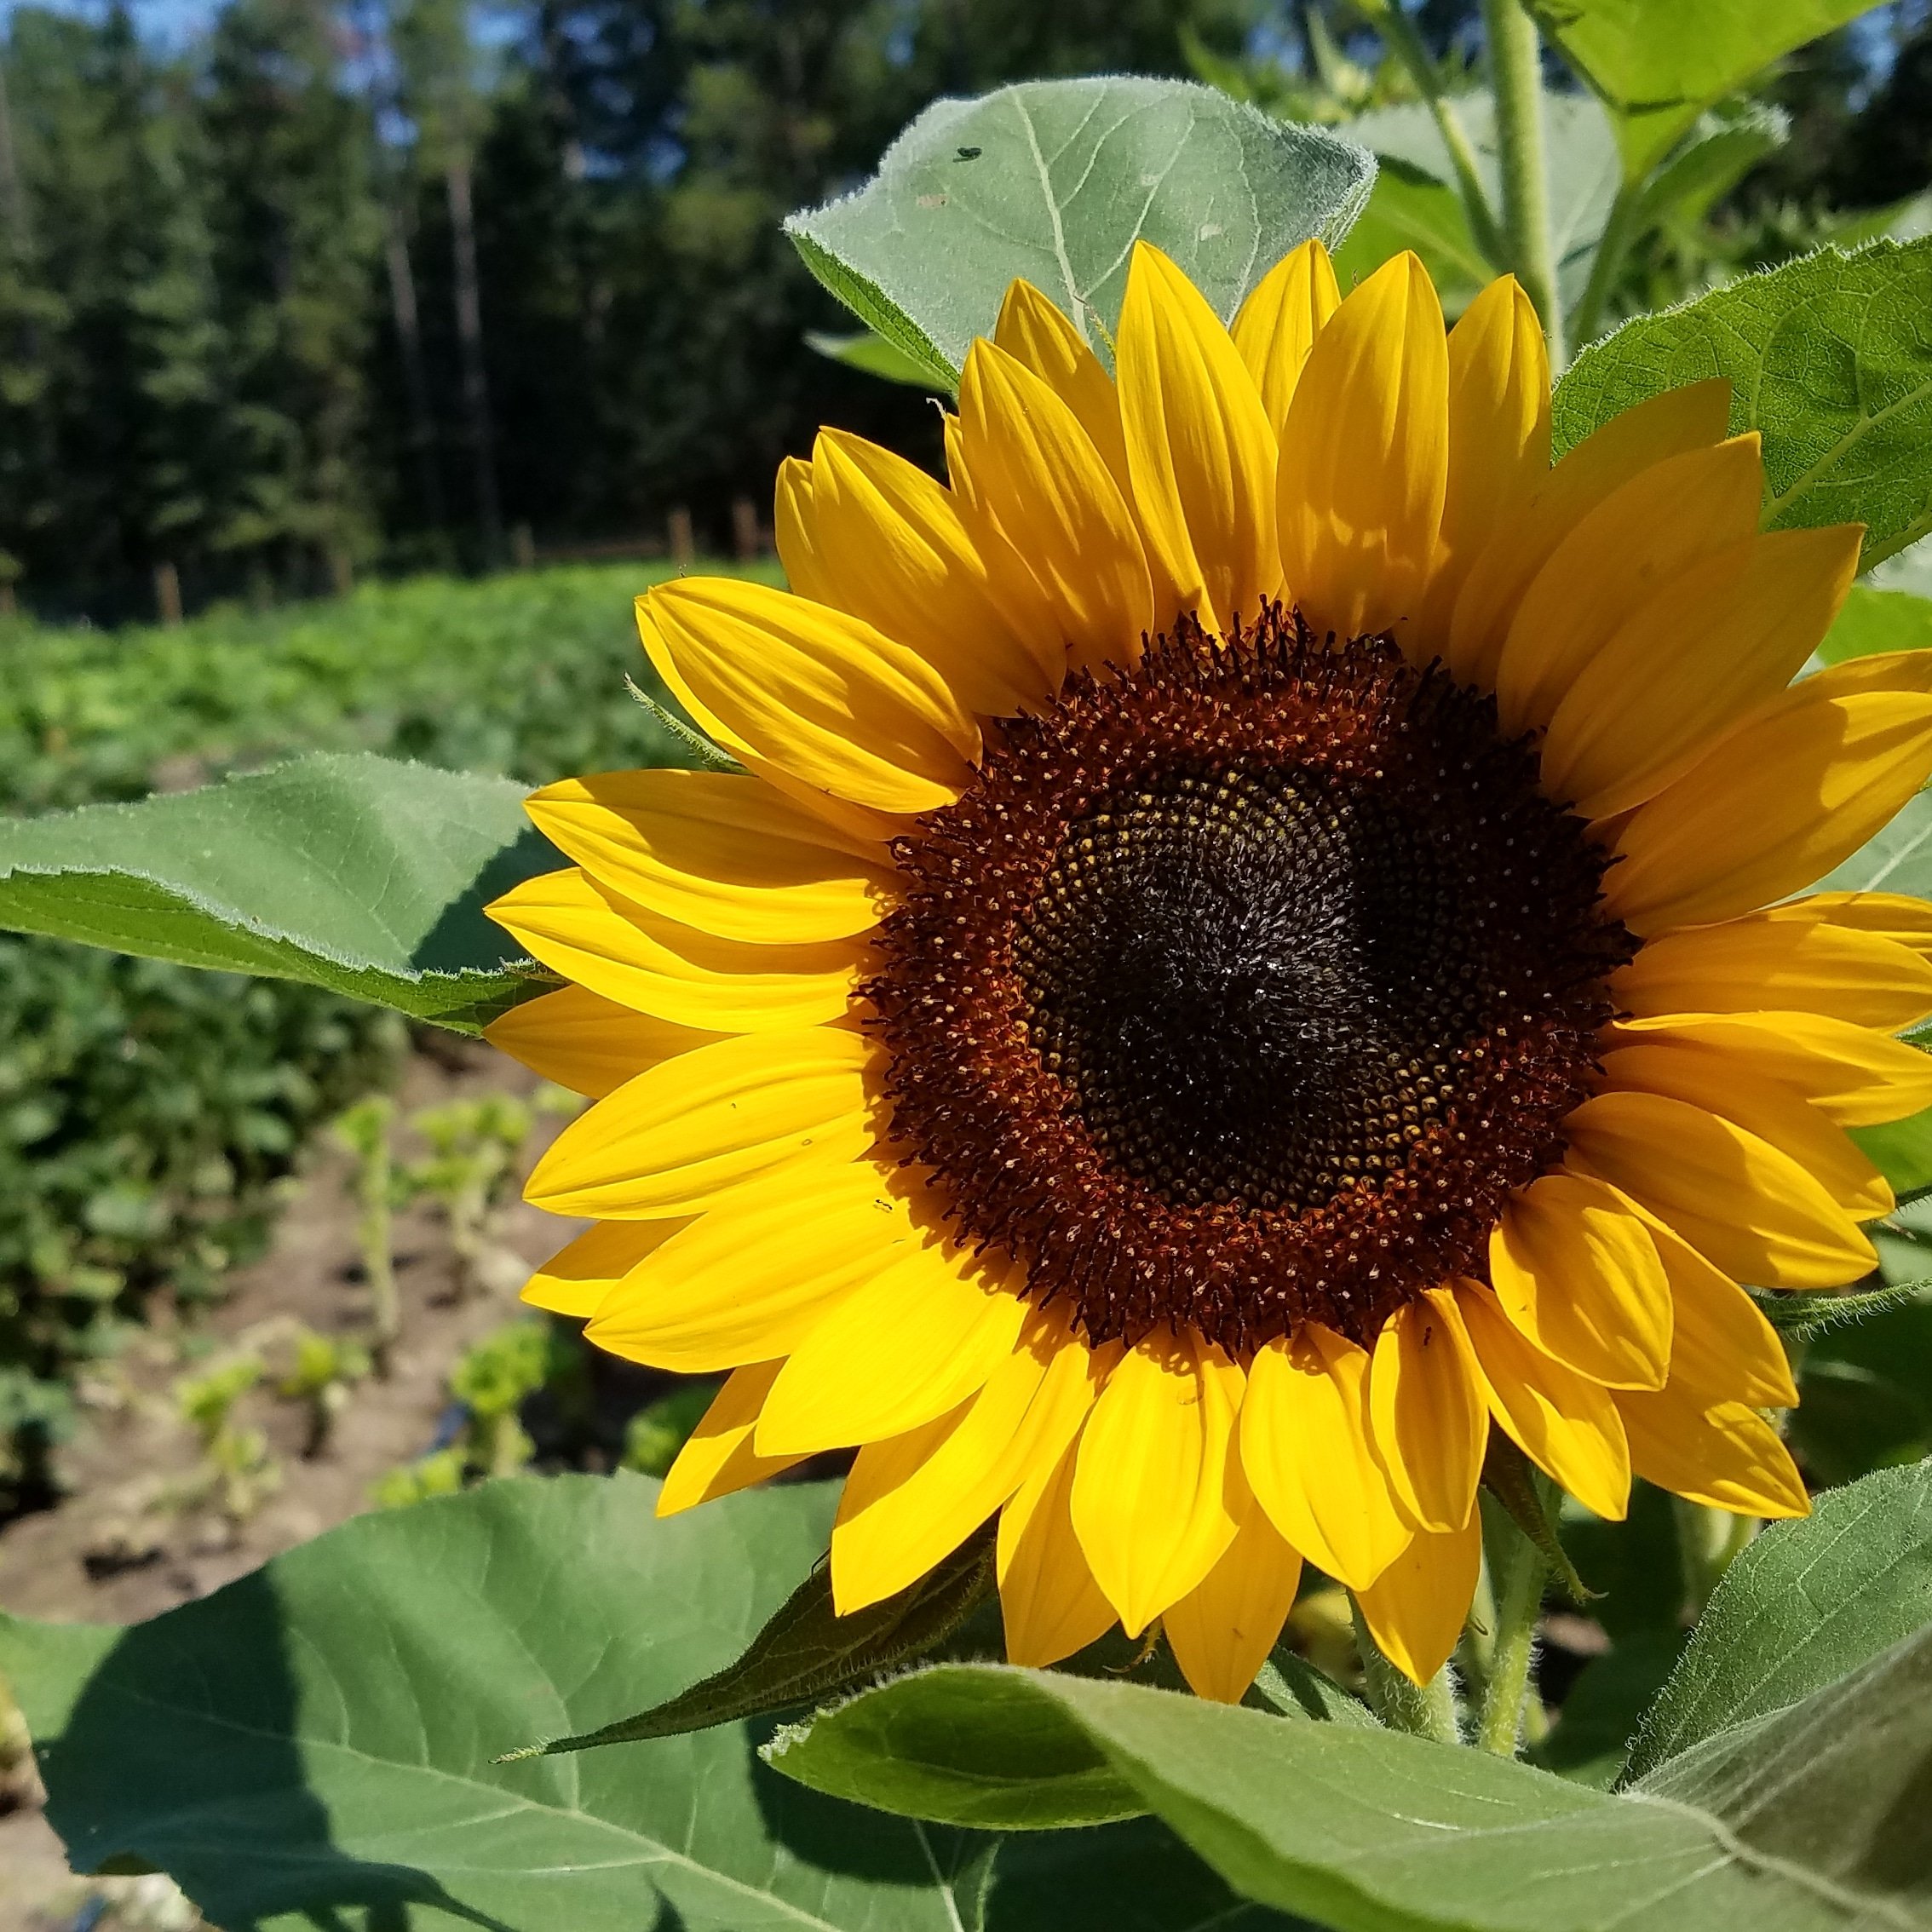 Next Happening: Farm Happenings for August 21, 2019